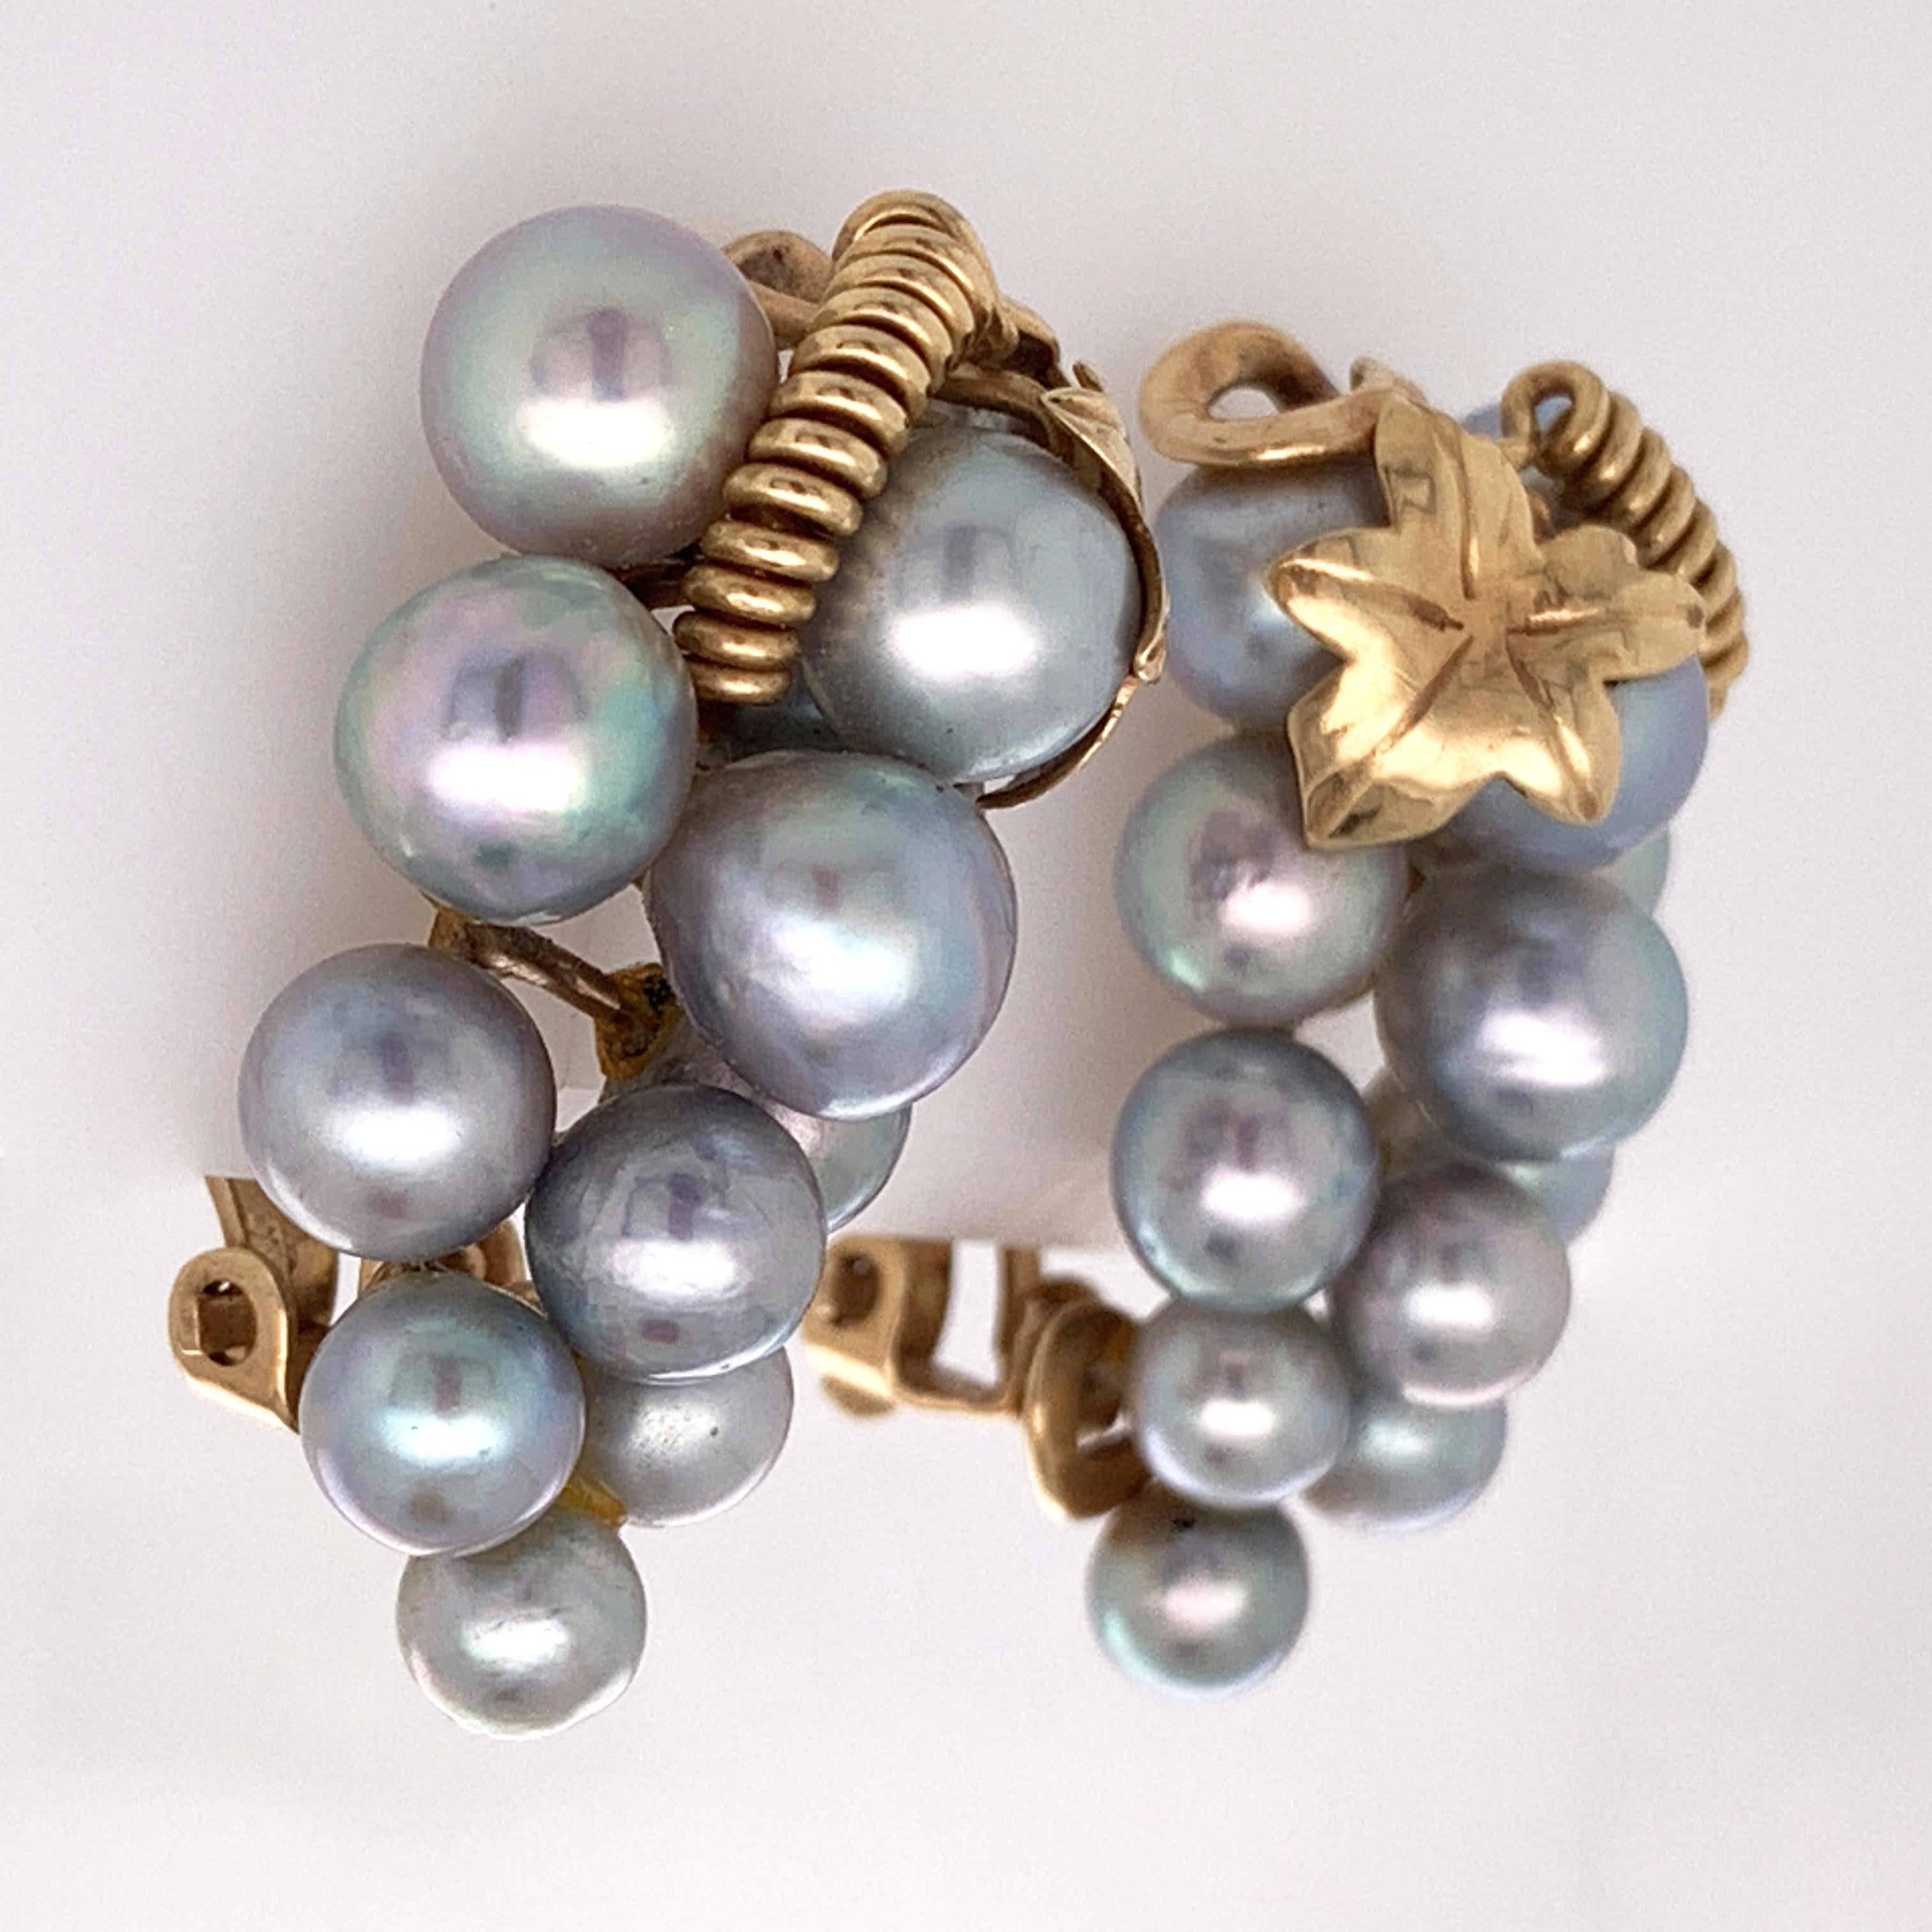 Pictured above is an unique and lovely pair of vintage 14 karat clip on pearl cluster earrings. Each earring features 12 lustrous pearls gathered together so as to imitate a decadent cluster of grapes hanging delicately off the vine, and each is